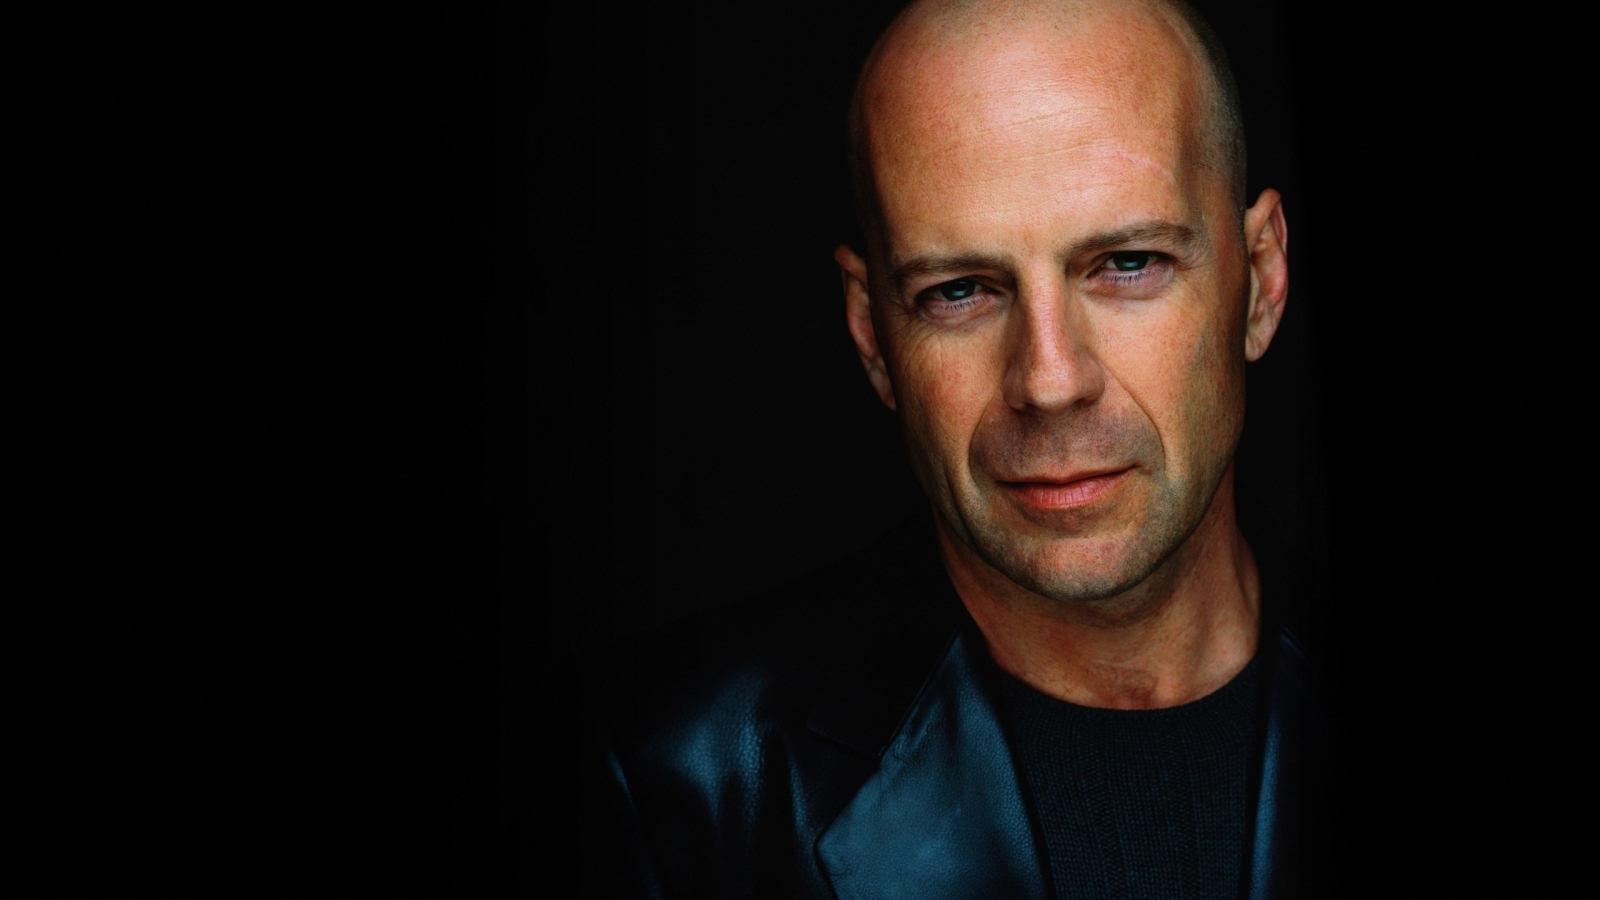 Bruce Willis Profile Look for 1600 x 900 HDTV resolution